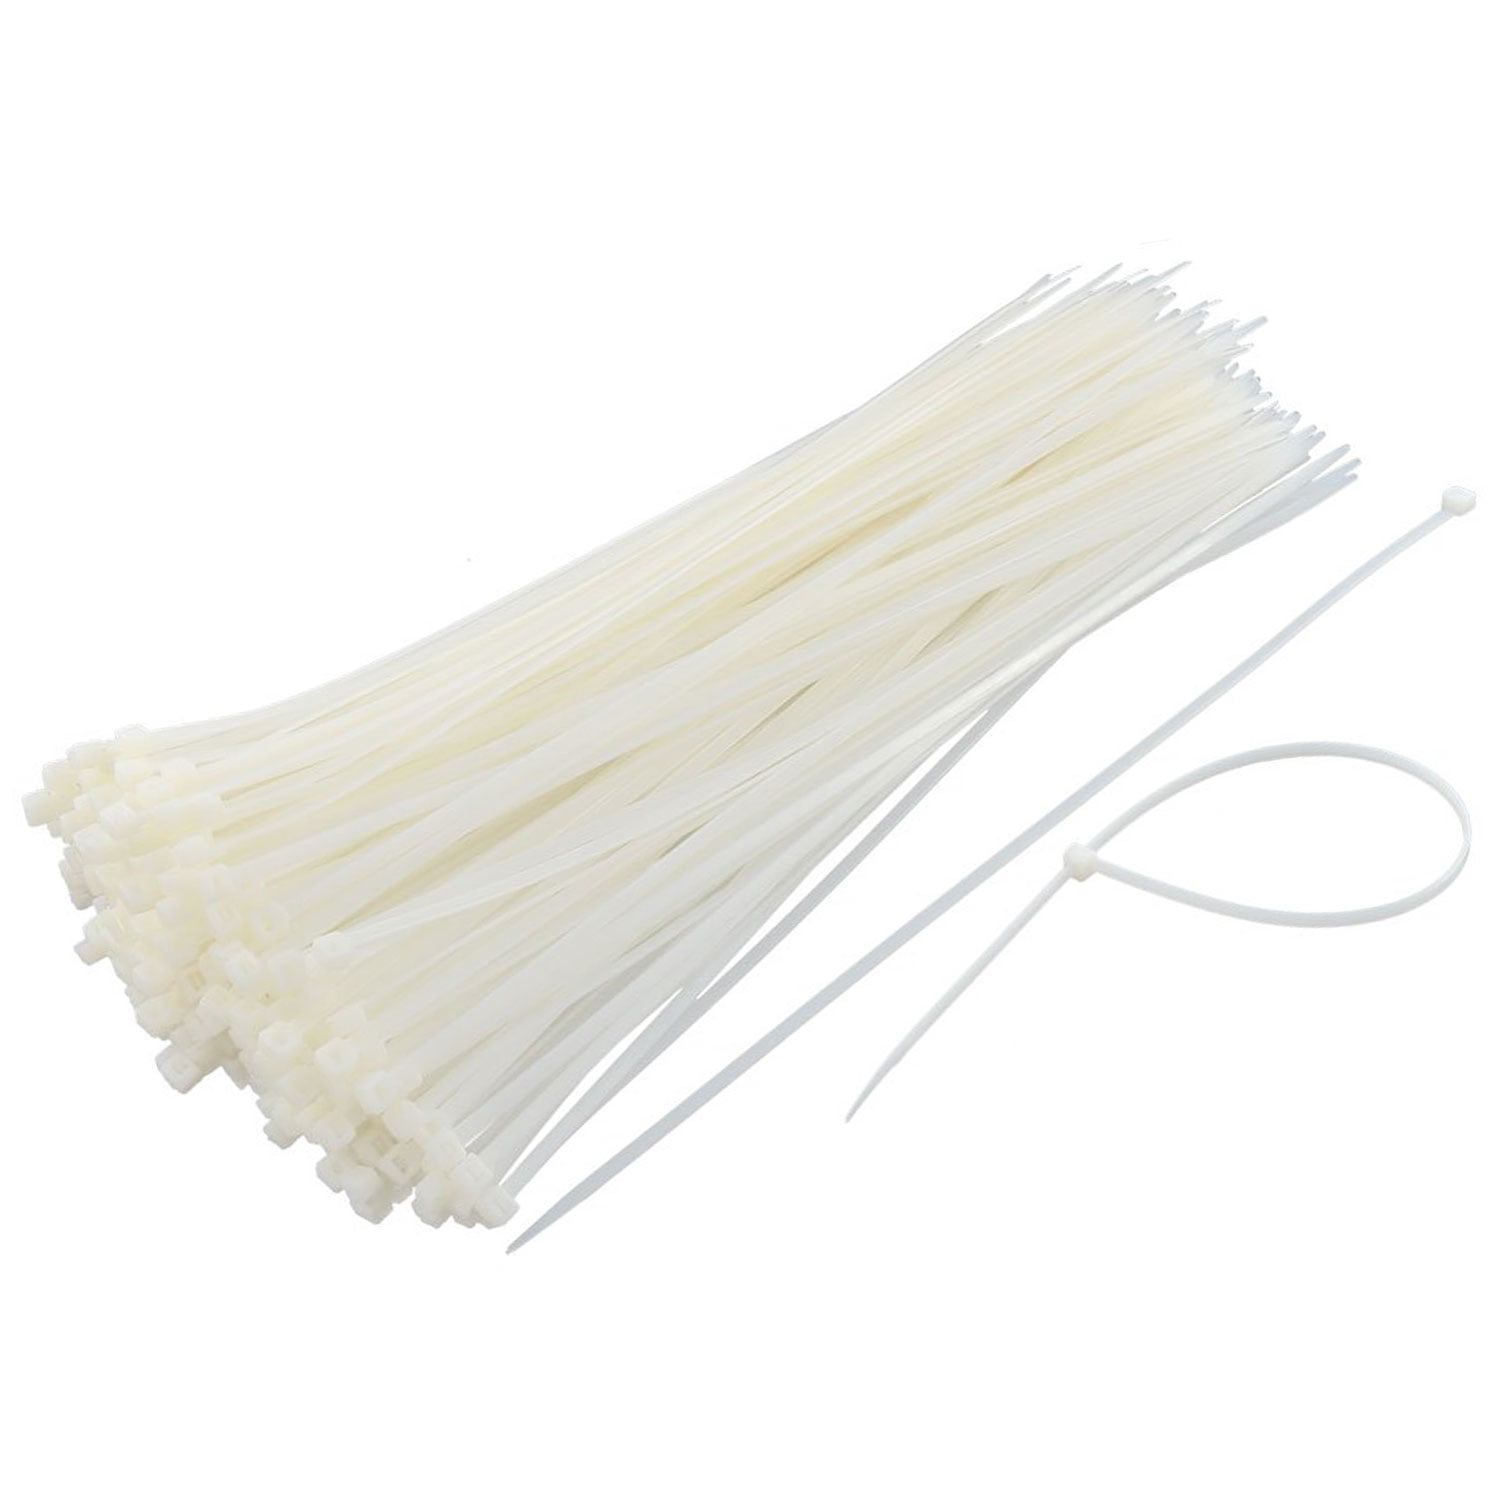 Size: 4x150mm/6 inches TrendBox 1000 White Self-Locking Nylon Plastic Cable Cord Zip Ties Wrap Fasten Wire Durable Indoor Outdoor Travel Home Corrosion Resistance 